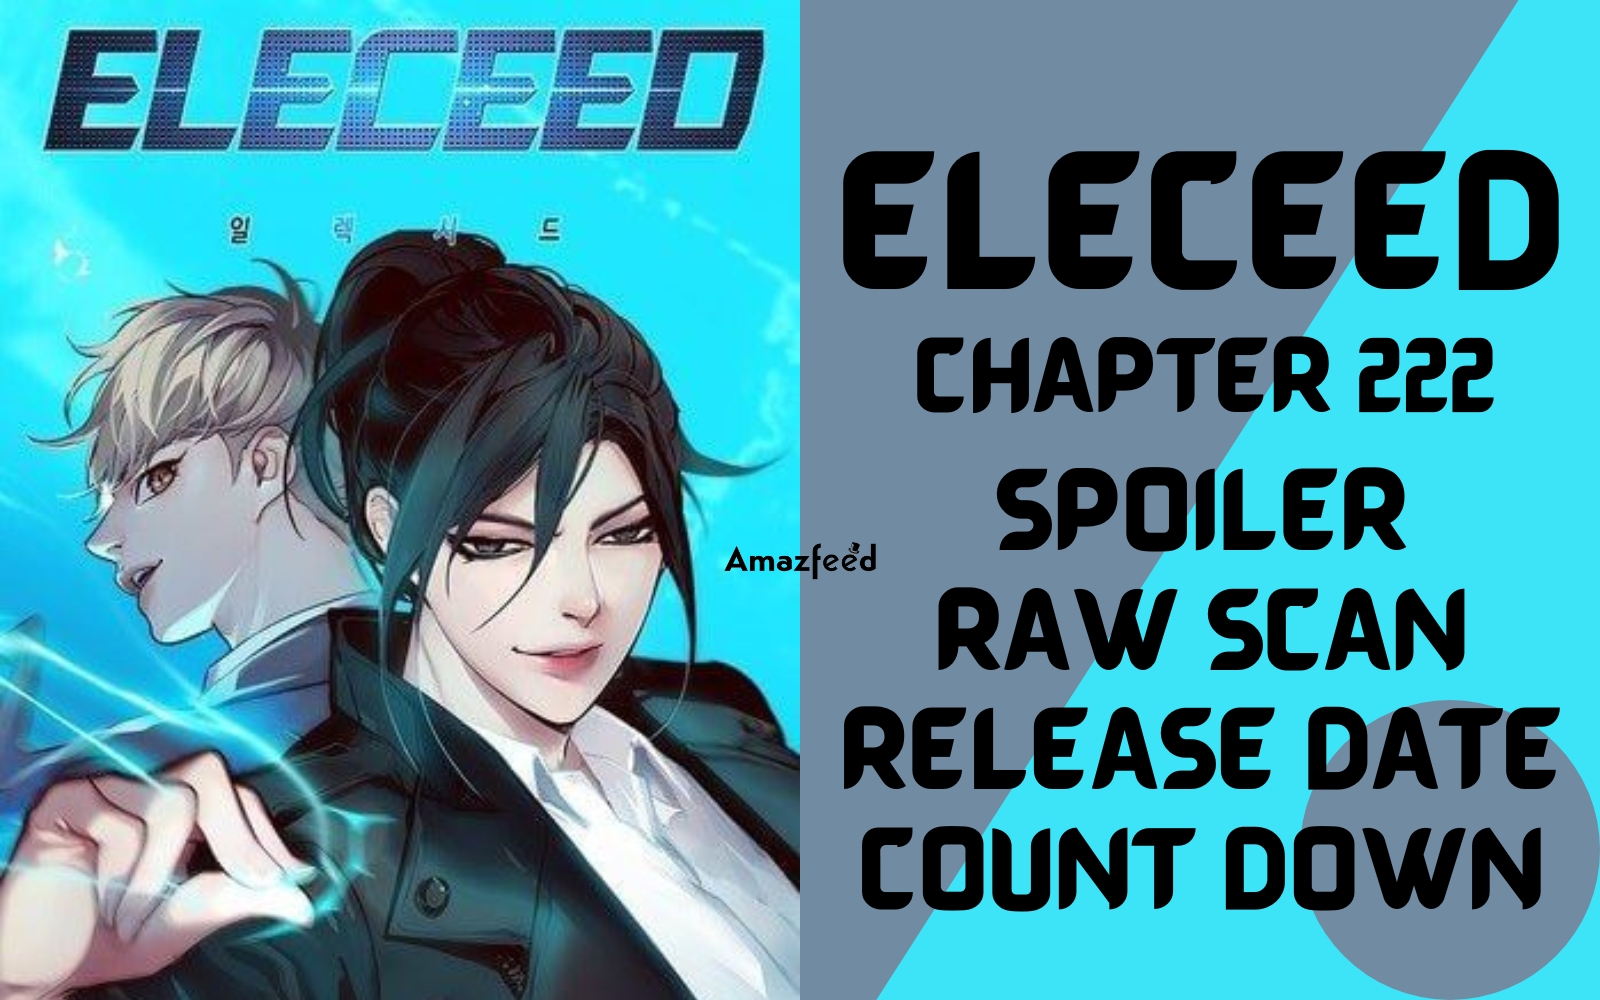 Eleceed Chapter 222 Spoilers, Raw Scan, Color Page, Release Date & Everything You Want to Know